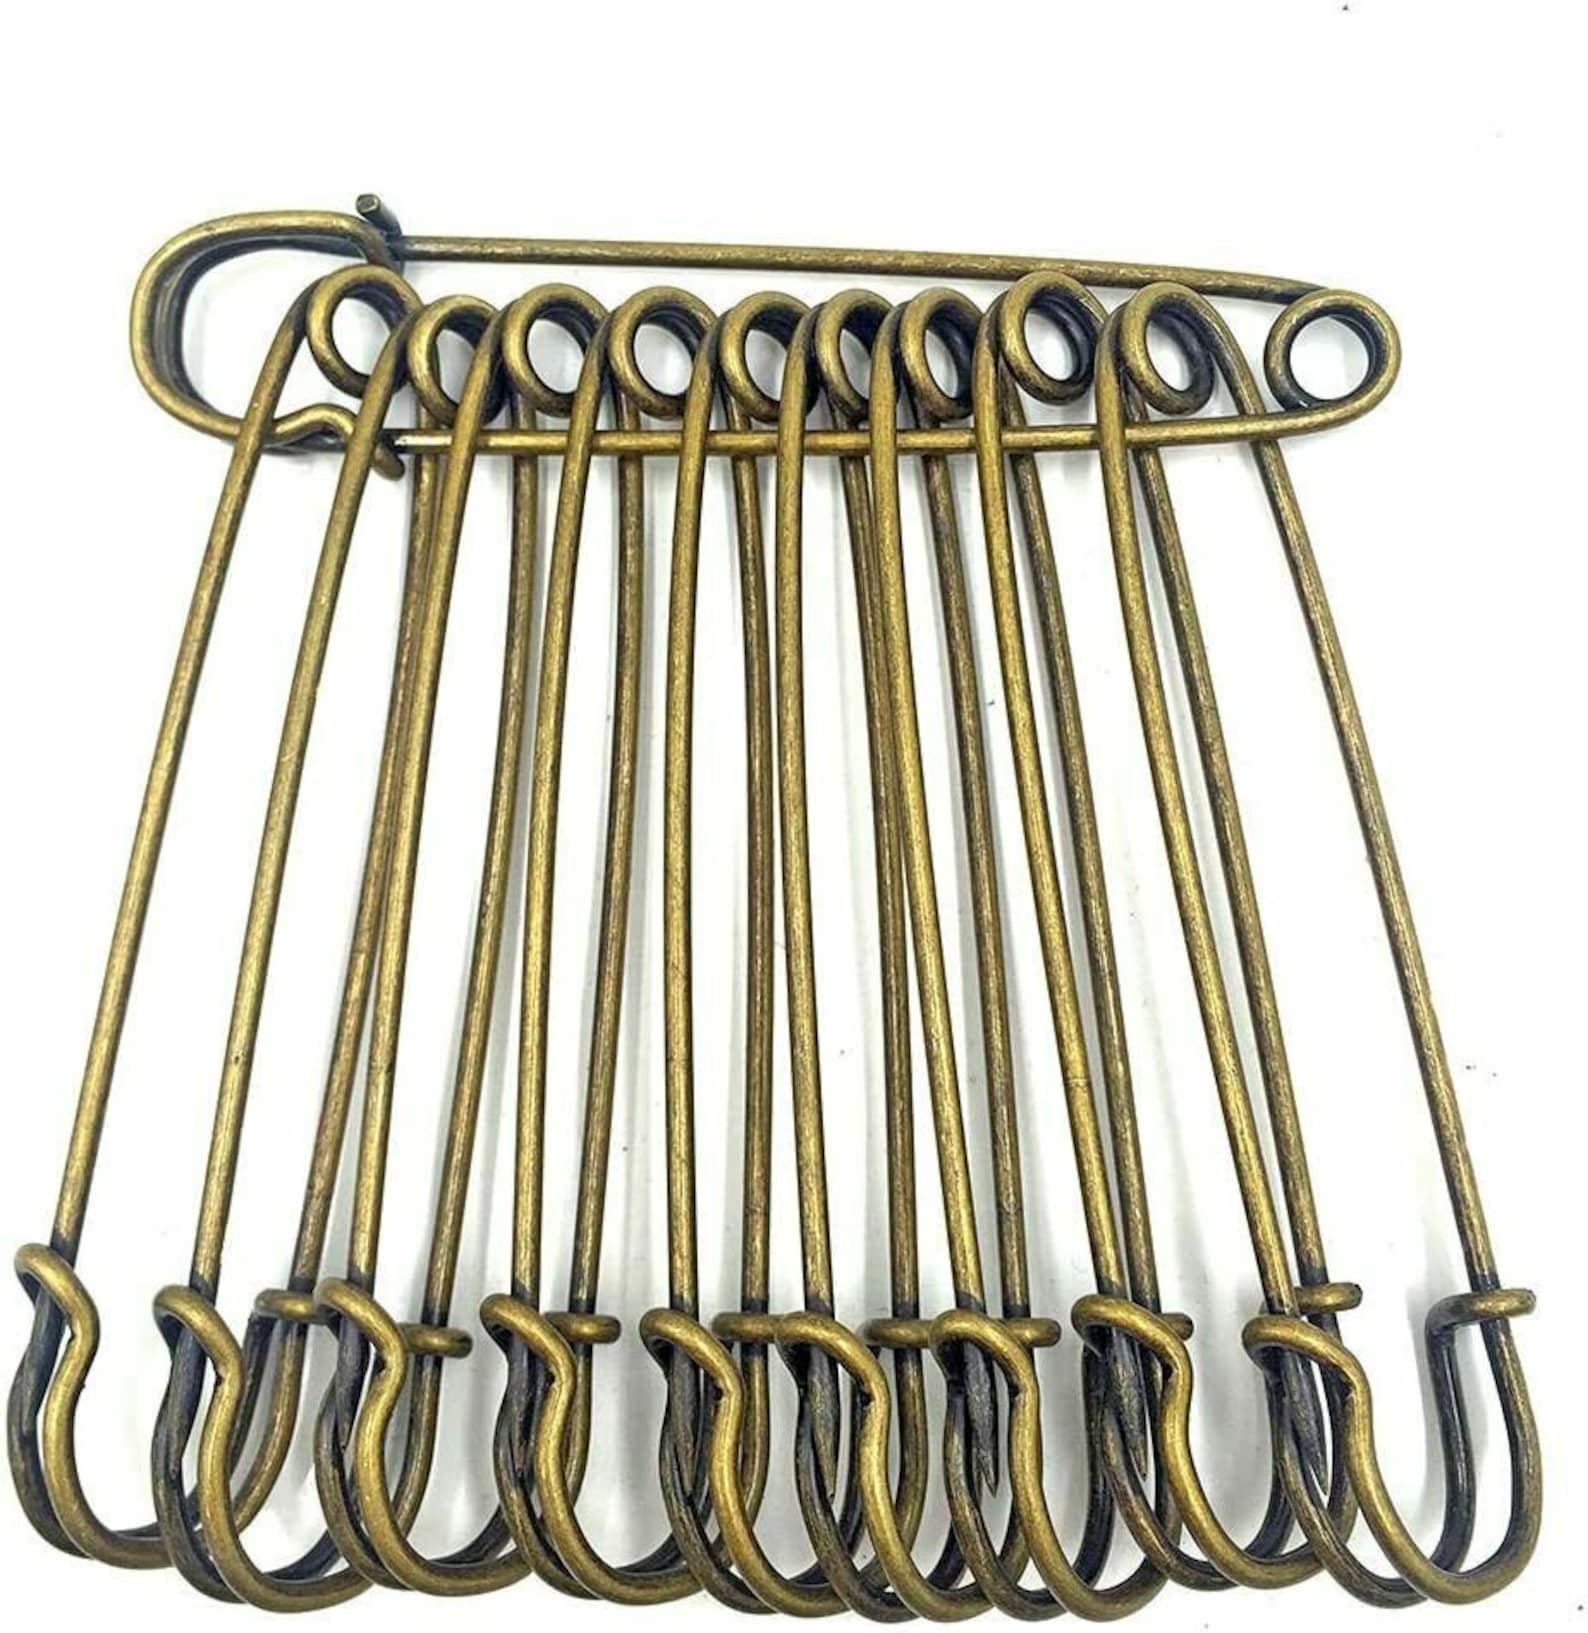 Extra Large Bronze Strong Heavy Duty Safety Pins Craft Jewelry - Etsy